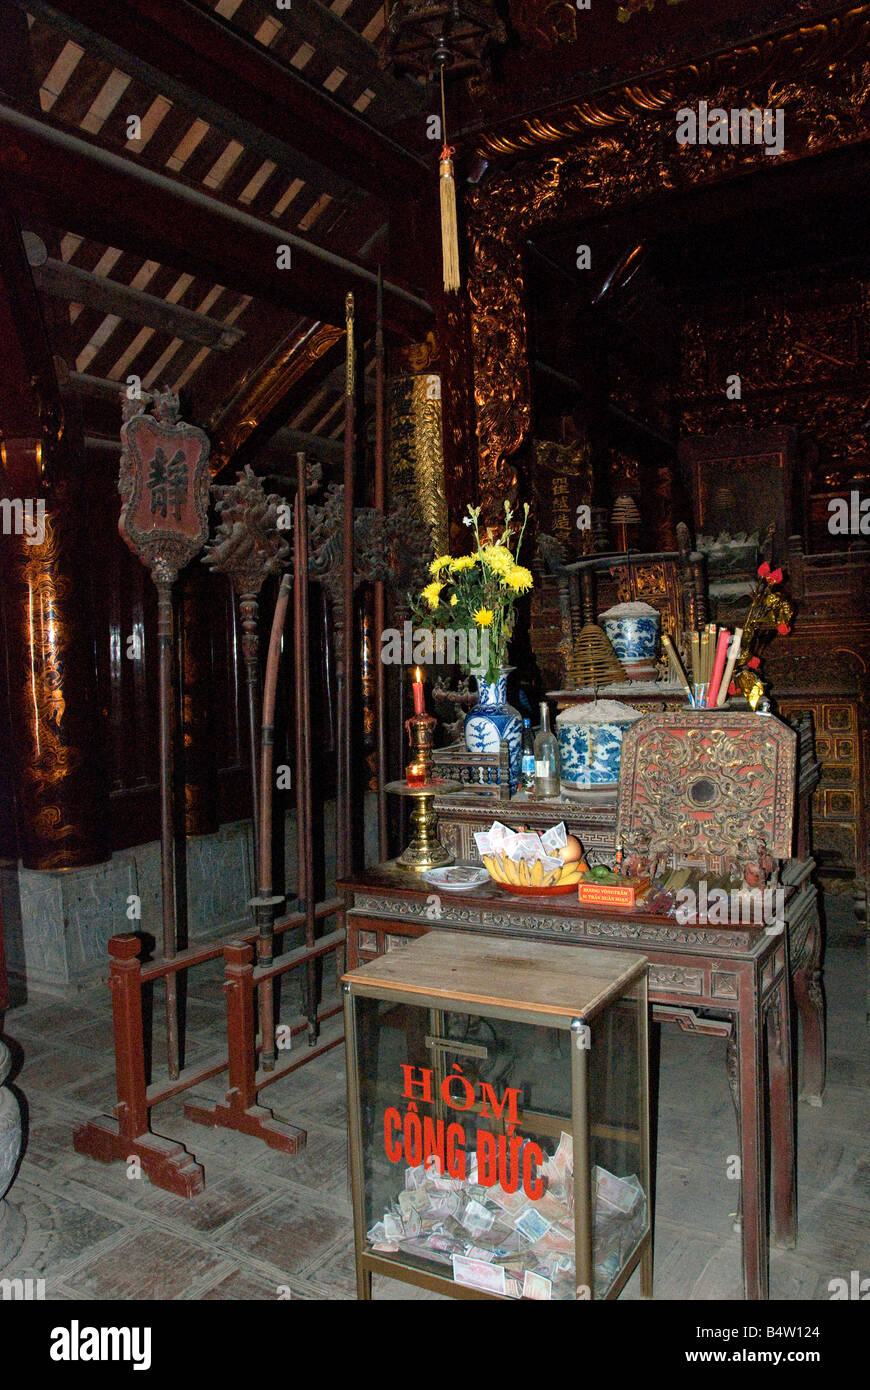 weaponry & symbols of power in Le Dai Hanh temple, an early Le monarch (980 - 1009), in Hoa Lu, an early capital of Vietnam Stock Photo